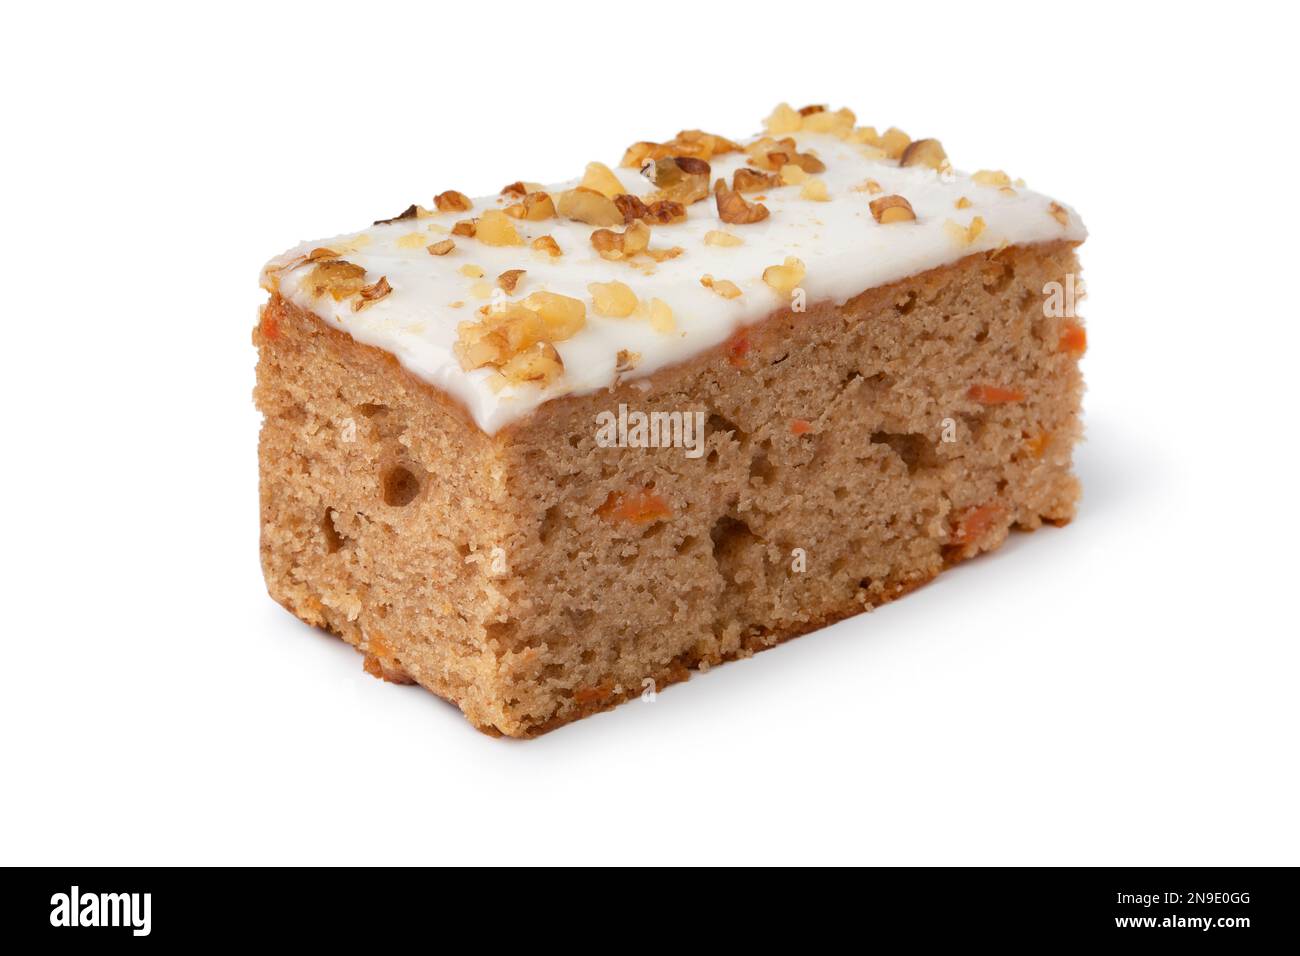 Piece of homemade carrot cake isolated on white background close up Stock Photo